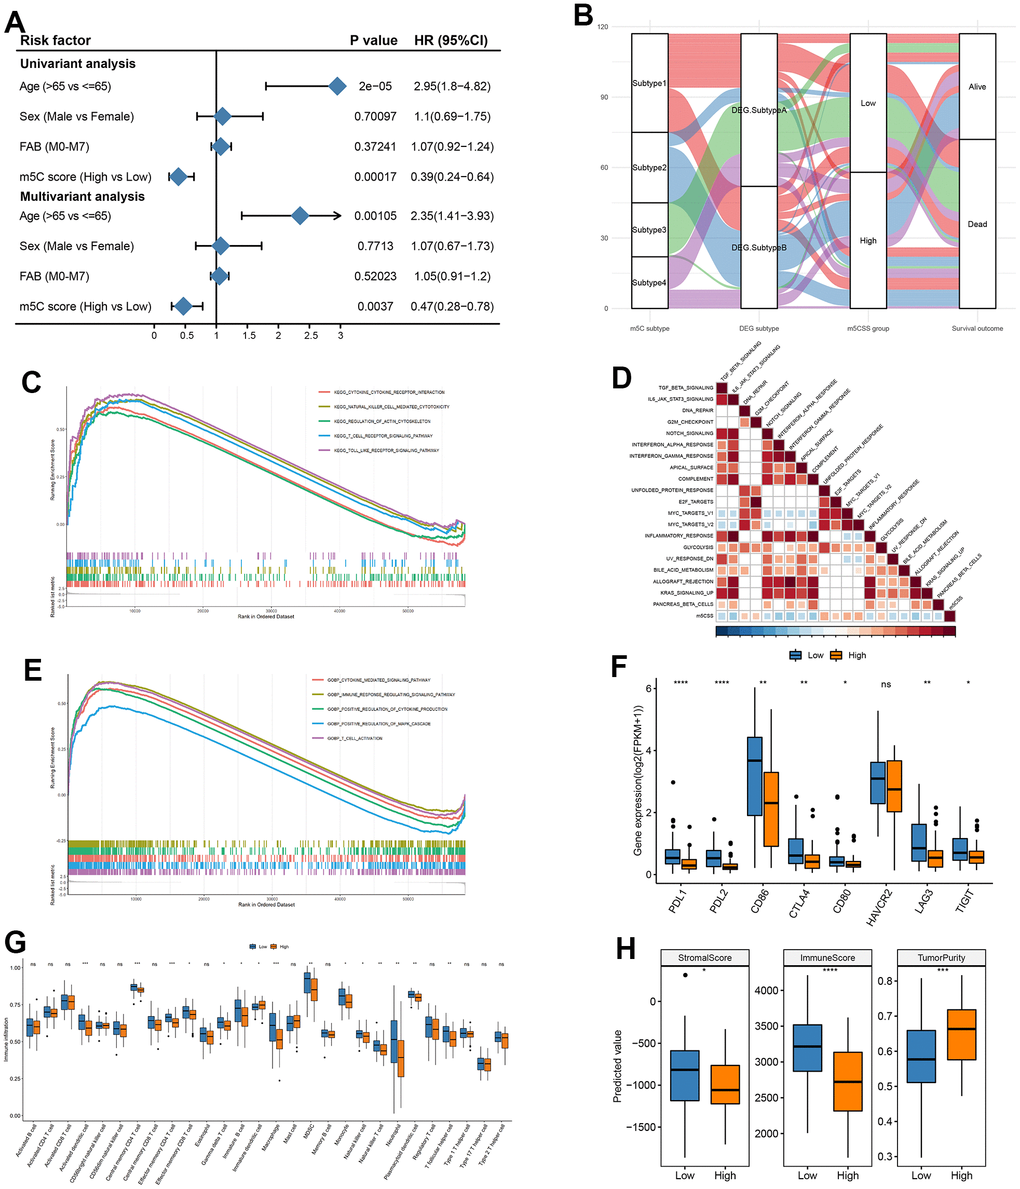 Construction of m5C gene signature. (A) Univariate cox analysis in training set and (B) impact plots (from left to right, m5C isoforms, differential gene expression subtypes and m5C score classification and final sample survival, respectively), (C) KEGG enrichment for high and low scoring subgroups, (D) correlation between m5C score and hallmark pathway, (E) GO enrichment for high and low scoring subgroups, (F) immune checkpoint gene expression differences, (G) immune cell differences, (H) stromal score, immune score and tumor purity in high and low subgroups.